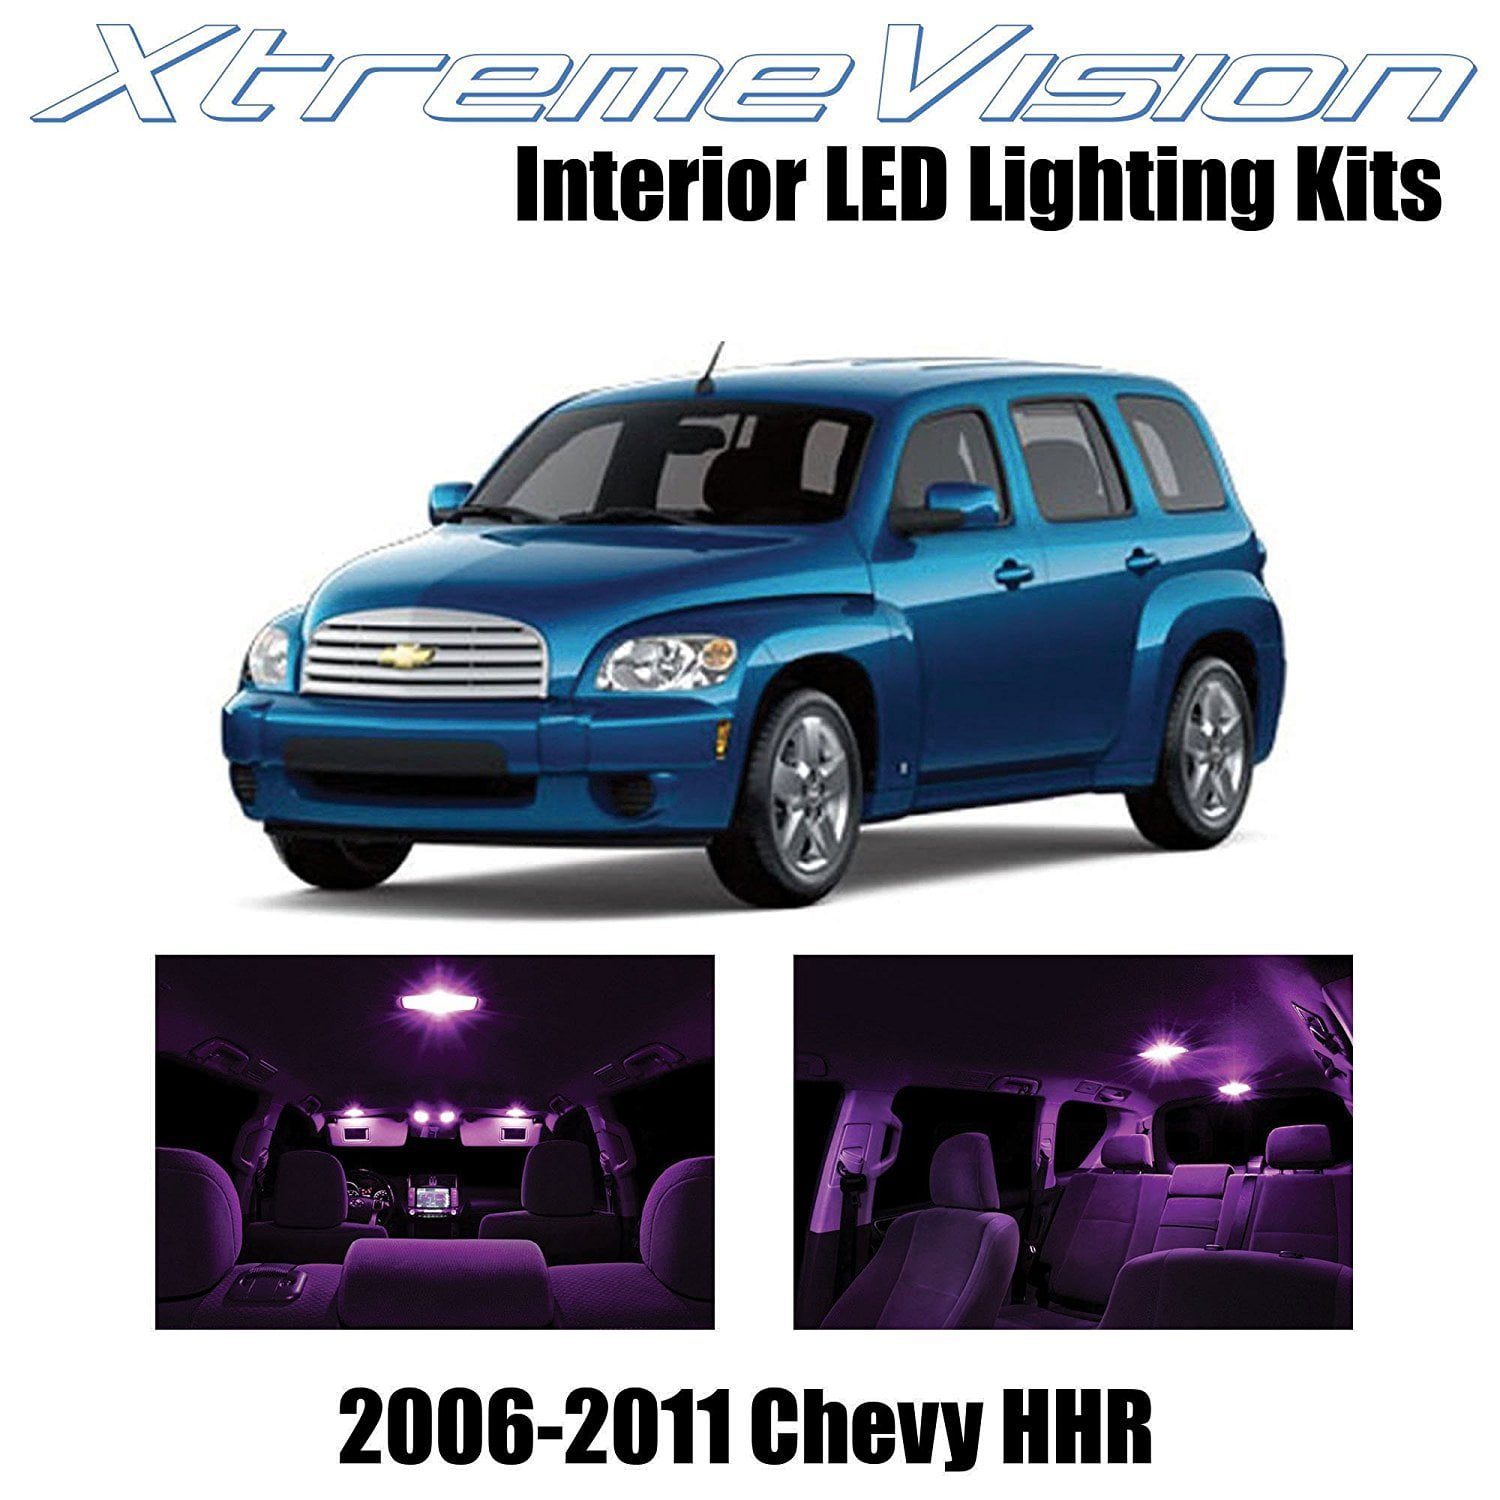 Xtremevision Led For Chevy Hhr 2006 2011 11 Pieces Pink Premium Interior Led Kit Package Installation Tool Walmart Com